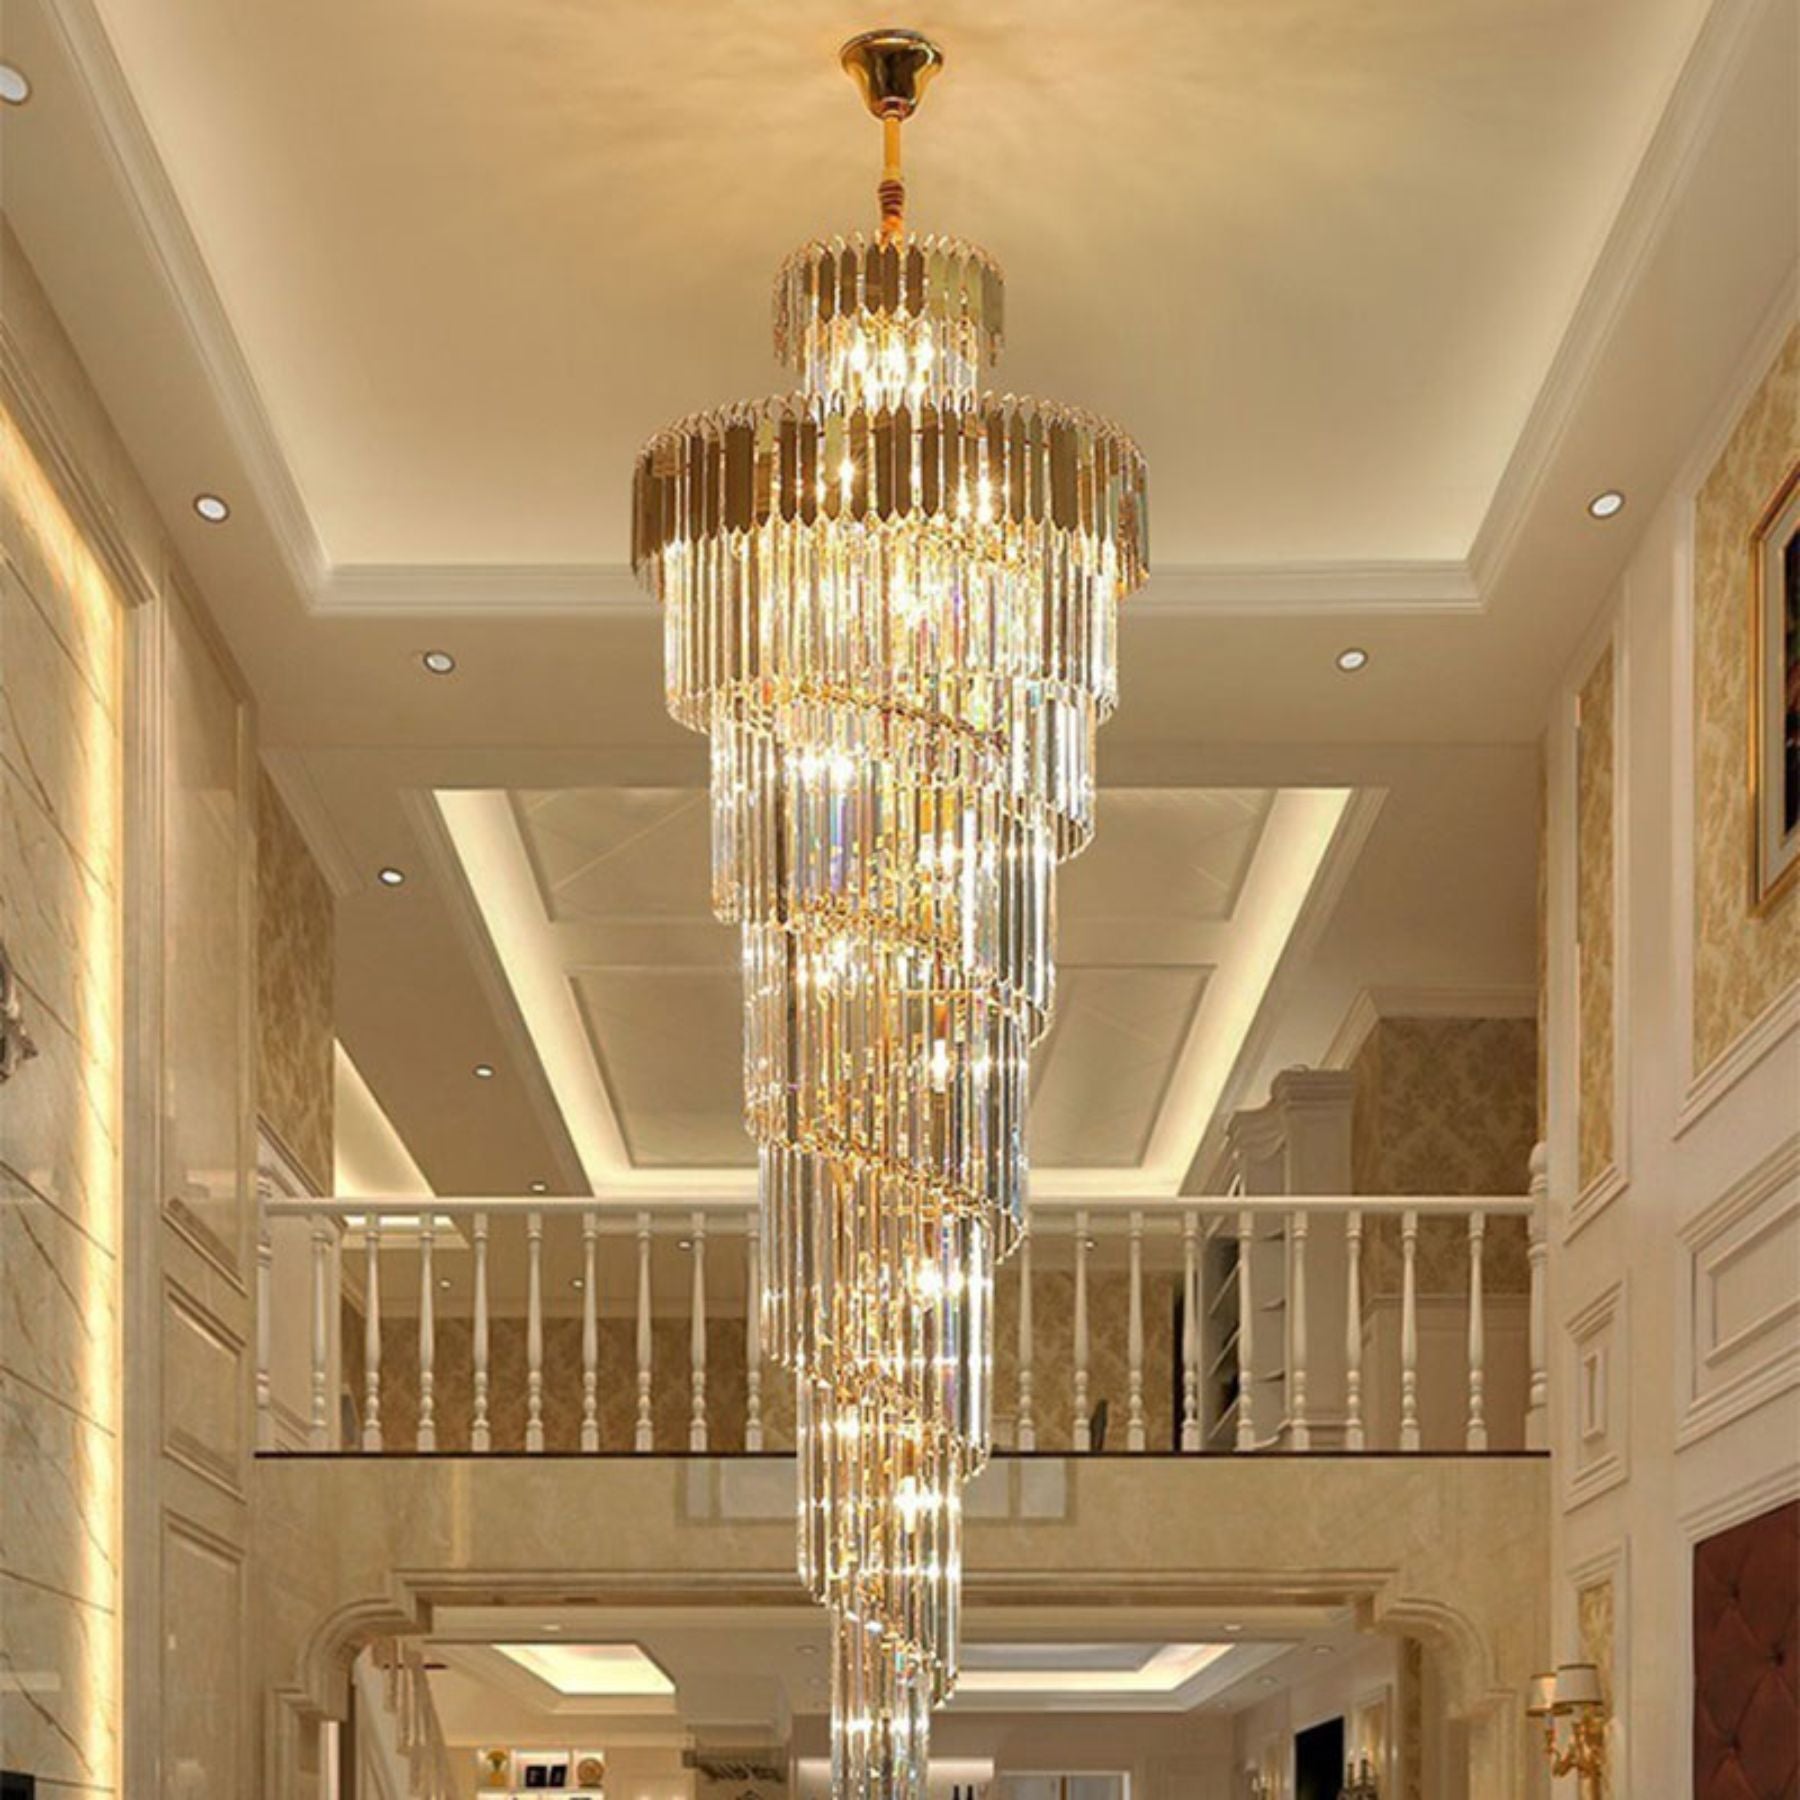 lamps bring sophistication and elegance and enhance the overall aesthetics of the space